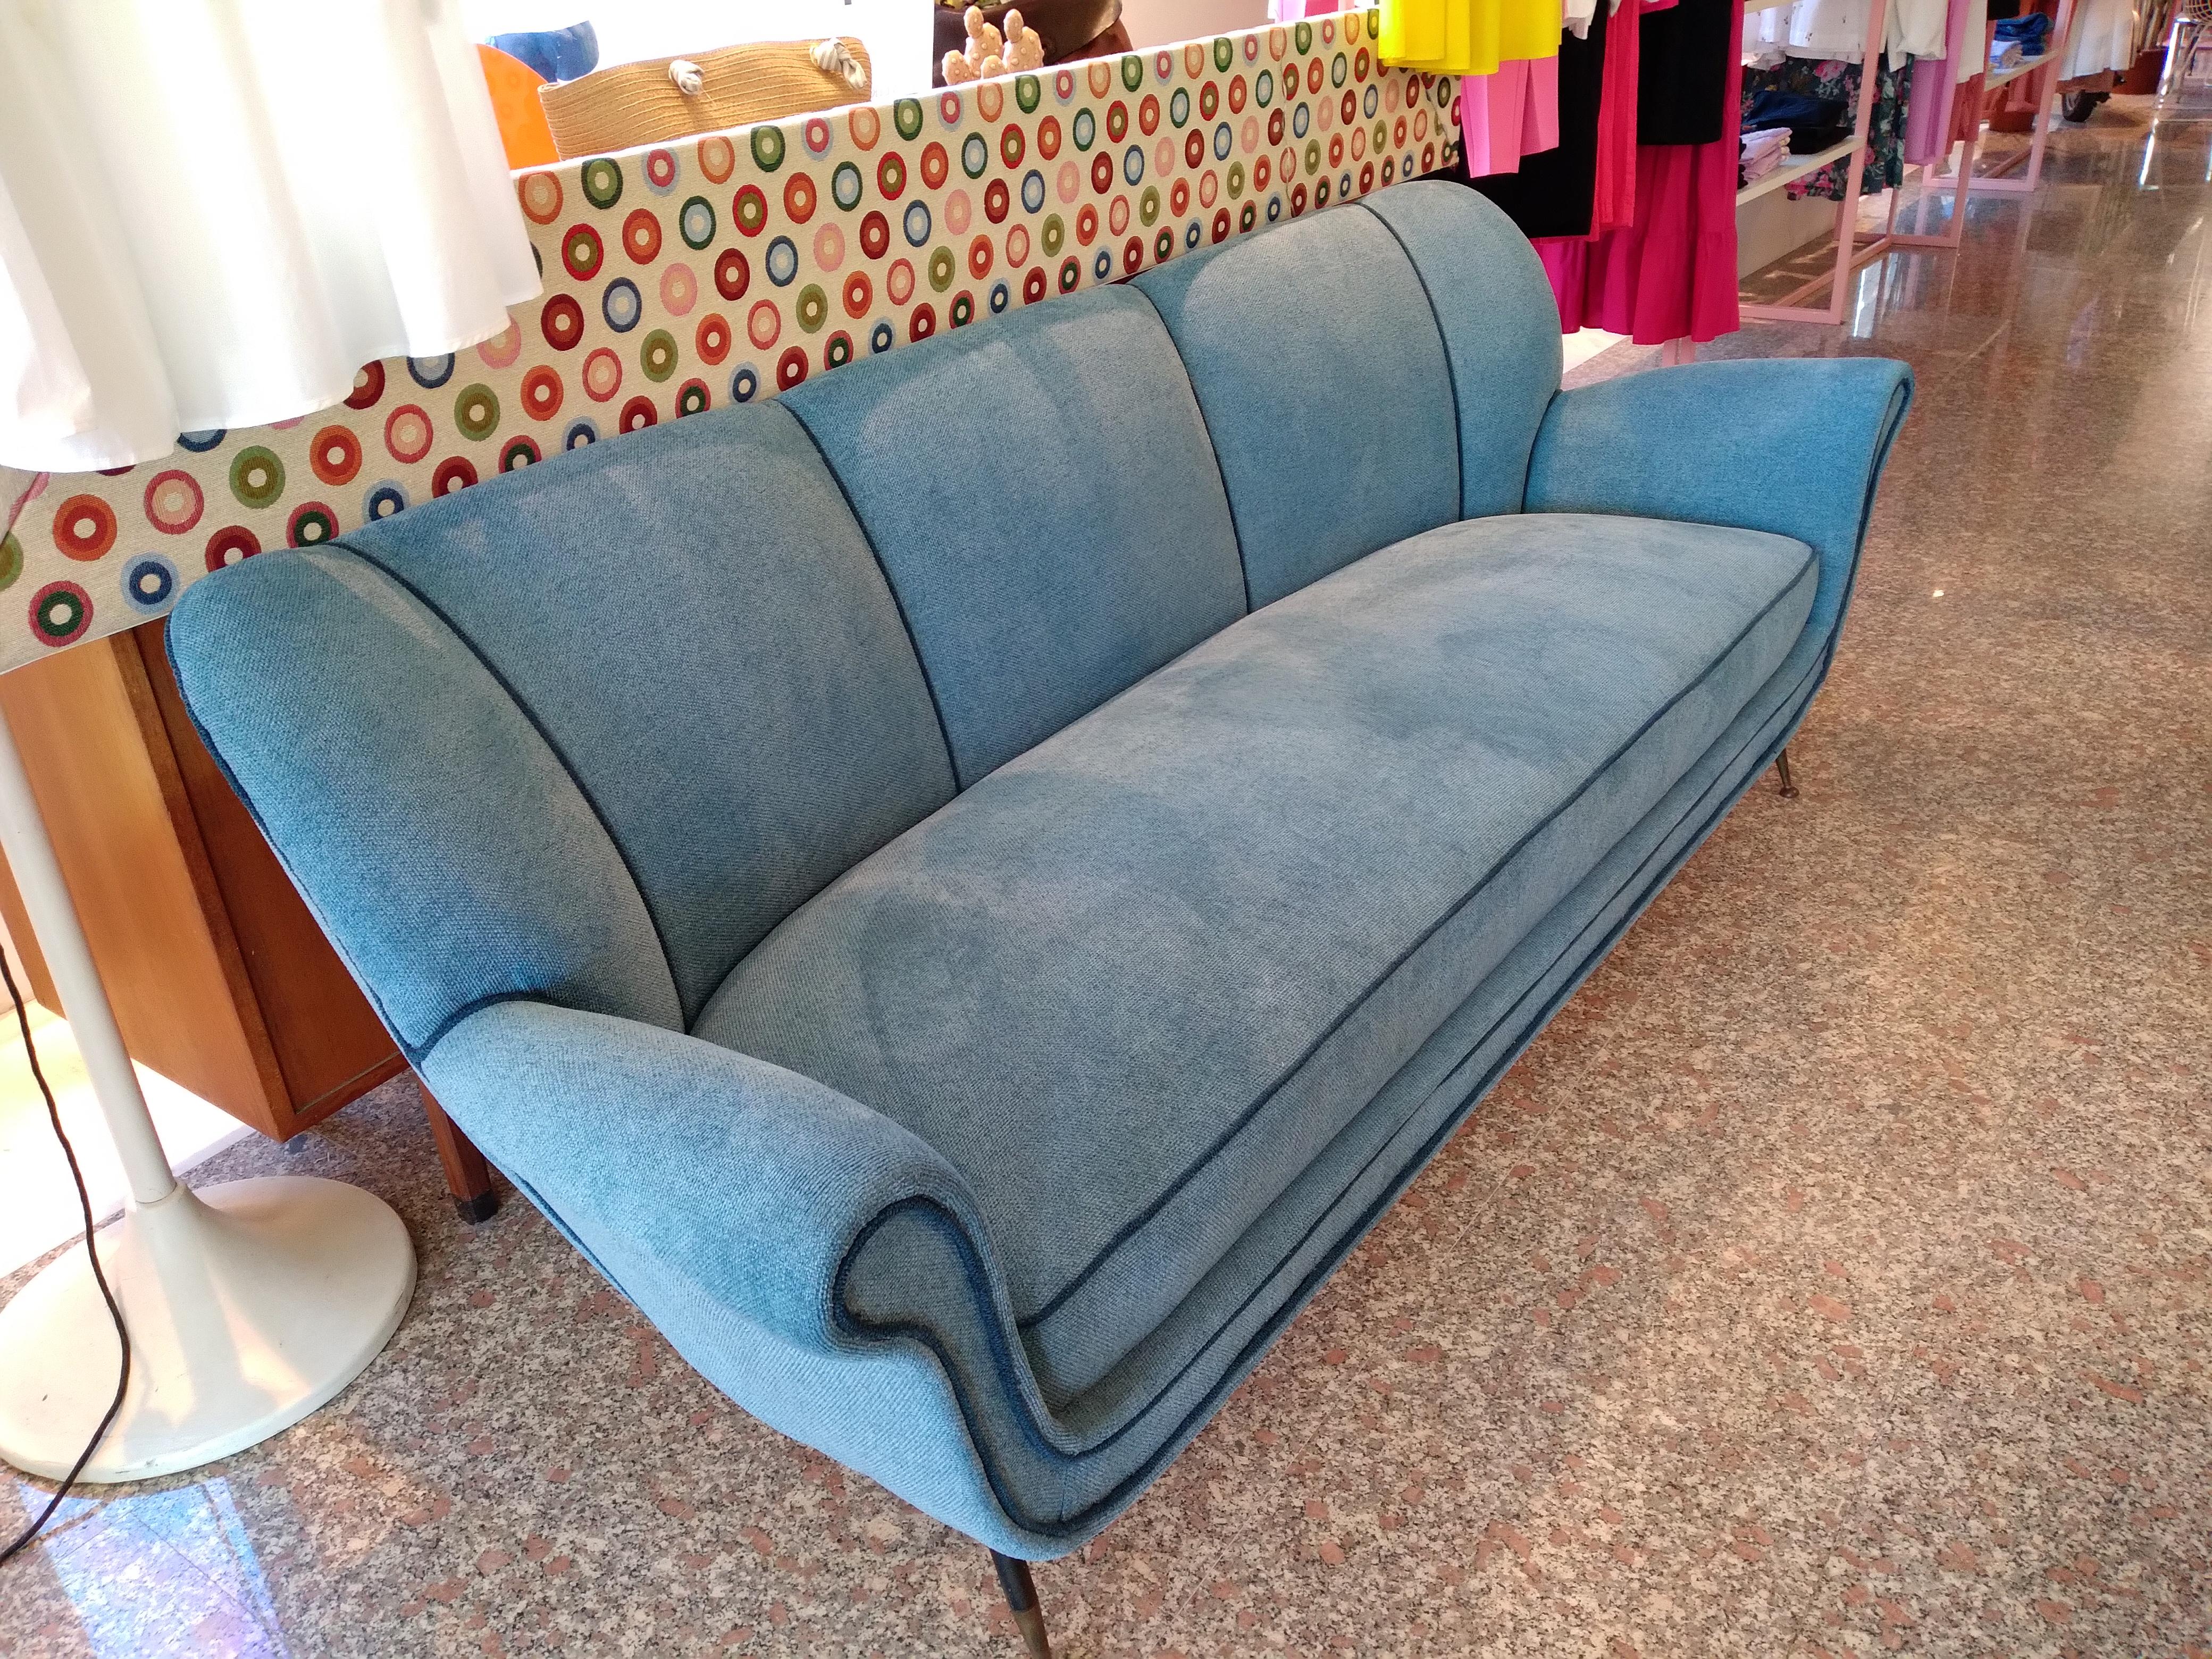 Gigi Radice curved sofa in blu velvet, brass and metal legs, Italy 1955s. The curved sofa is iconic piece of Mid-Century Modern Italian Design. It is very nice and decorative sofa.